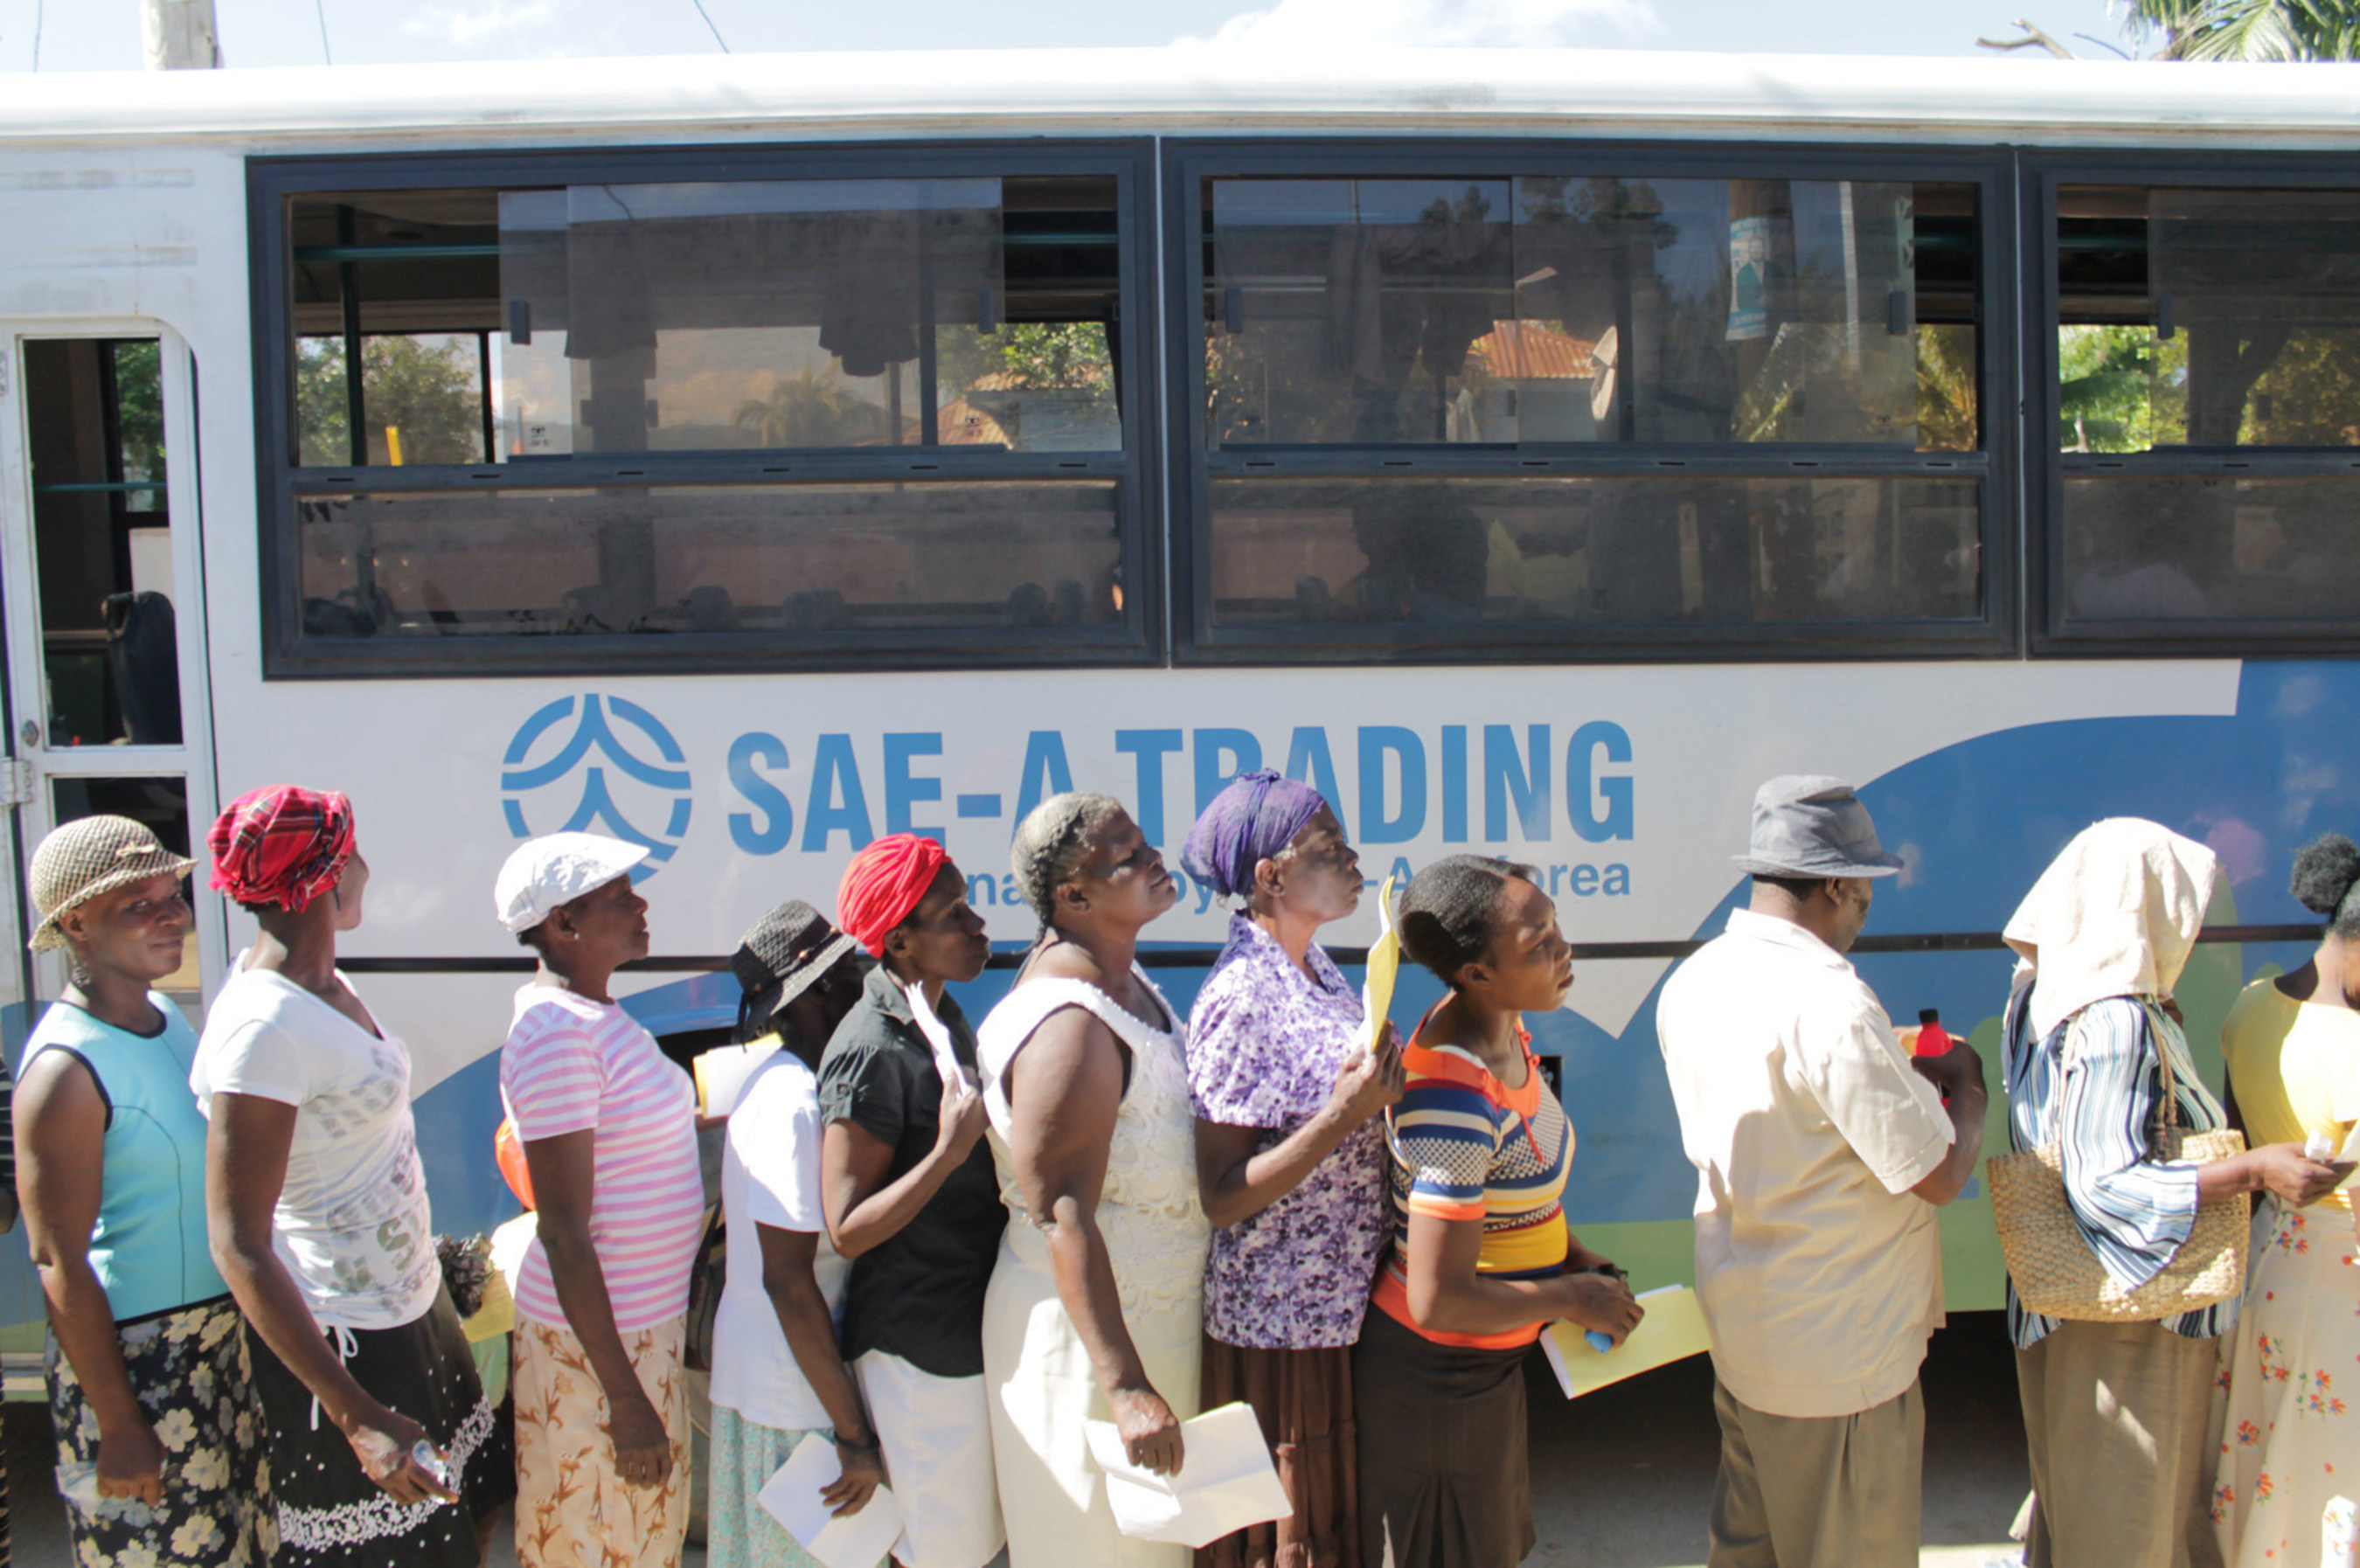 Local residents are standing in line to get on the buses provided by Sae-A to be transported to medical service place.